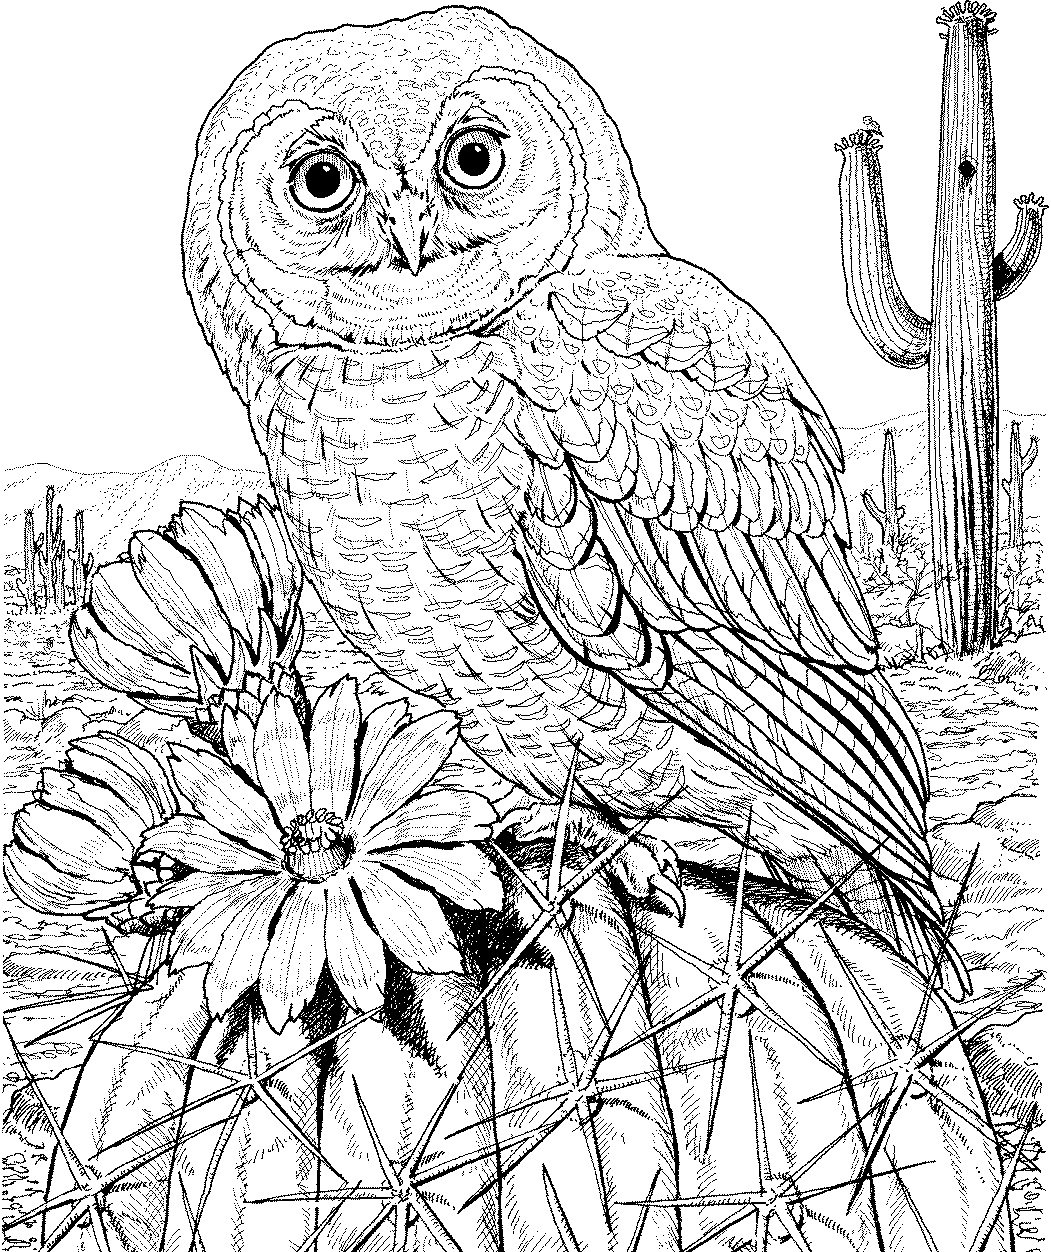 Owl Coloring Pages For Adult | Free Coloring Pages